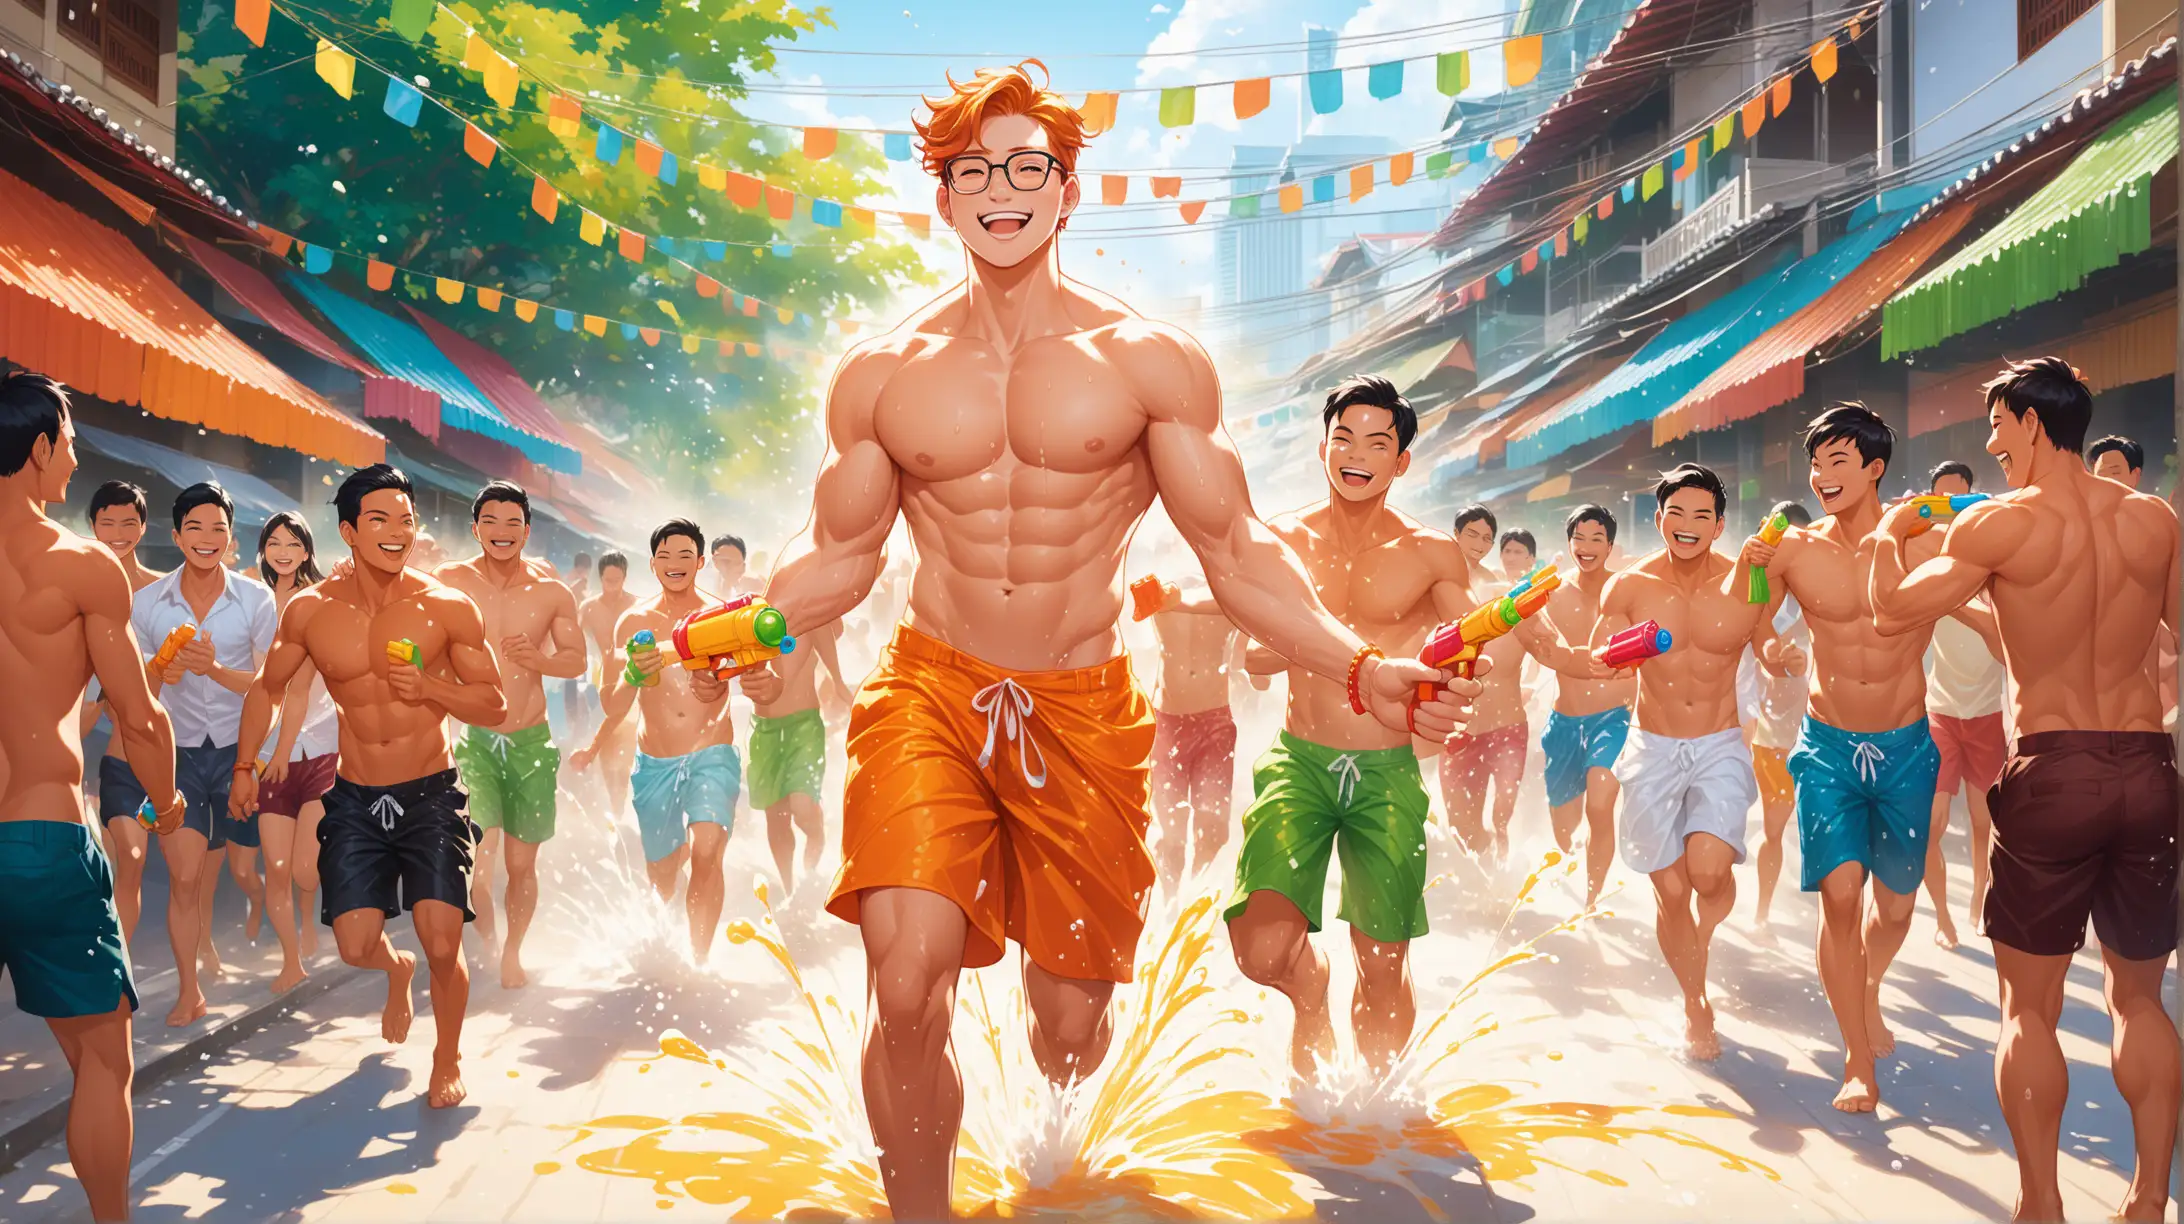 Charismatic Laurence Leads Spirited Water Fights at Songkran Festival in Bangkok